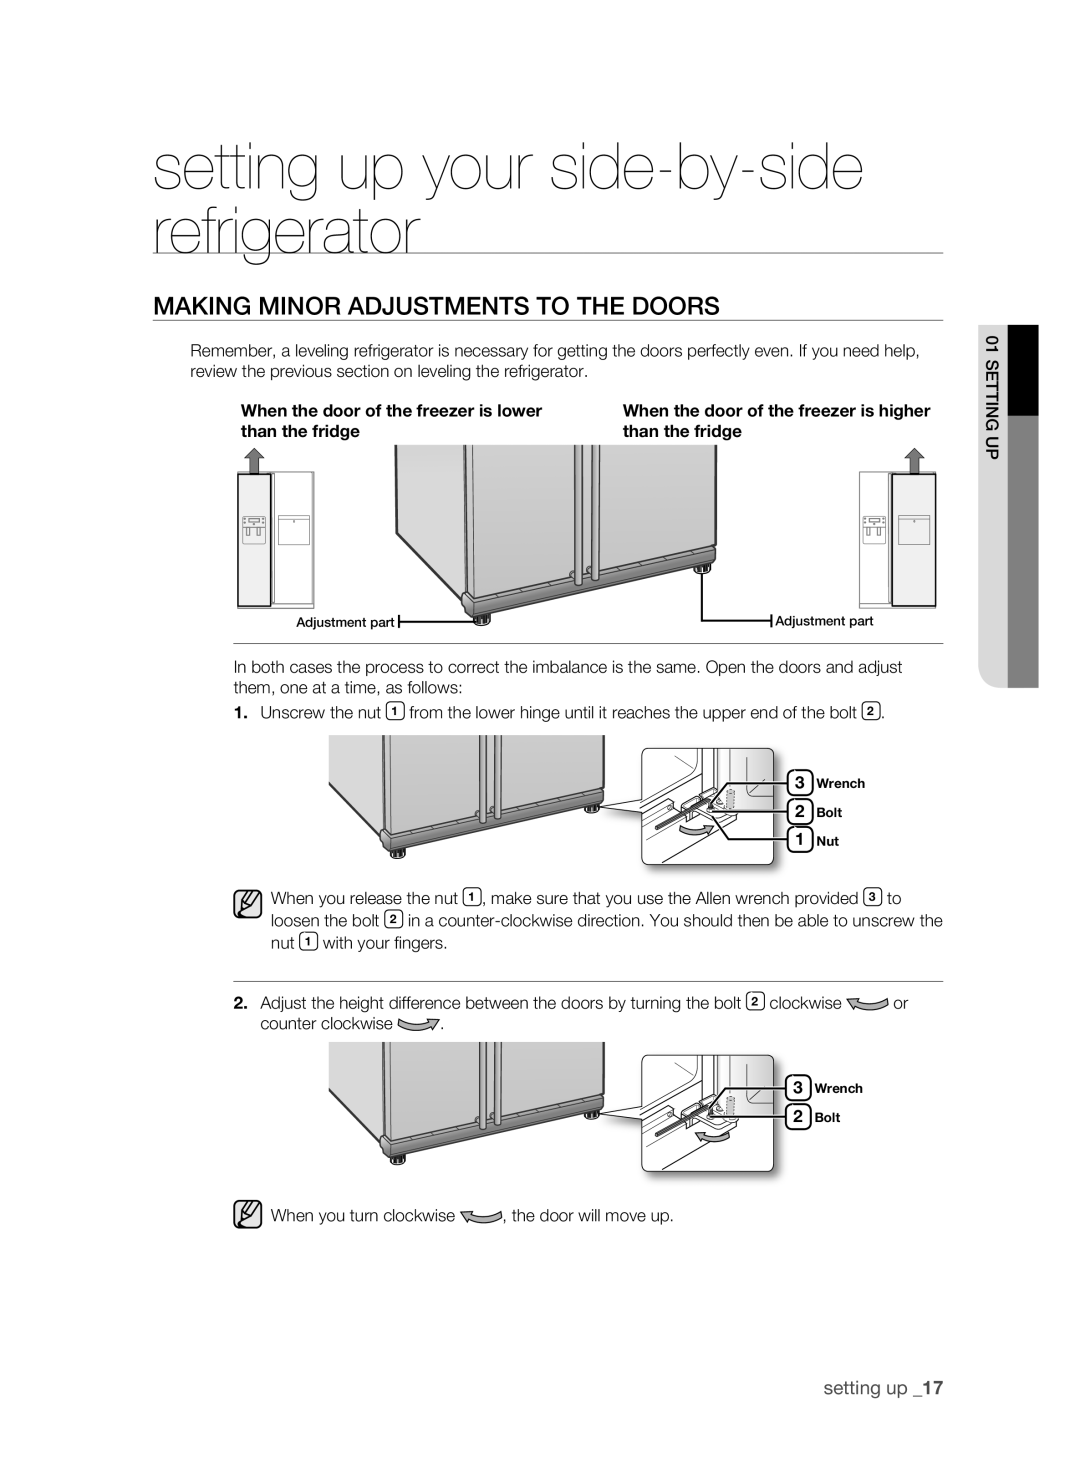 Samsung RSH1N, RSH1K Making mInor adjustments to the doors, setting up your side-by-side refrigerator, than the fridge 